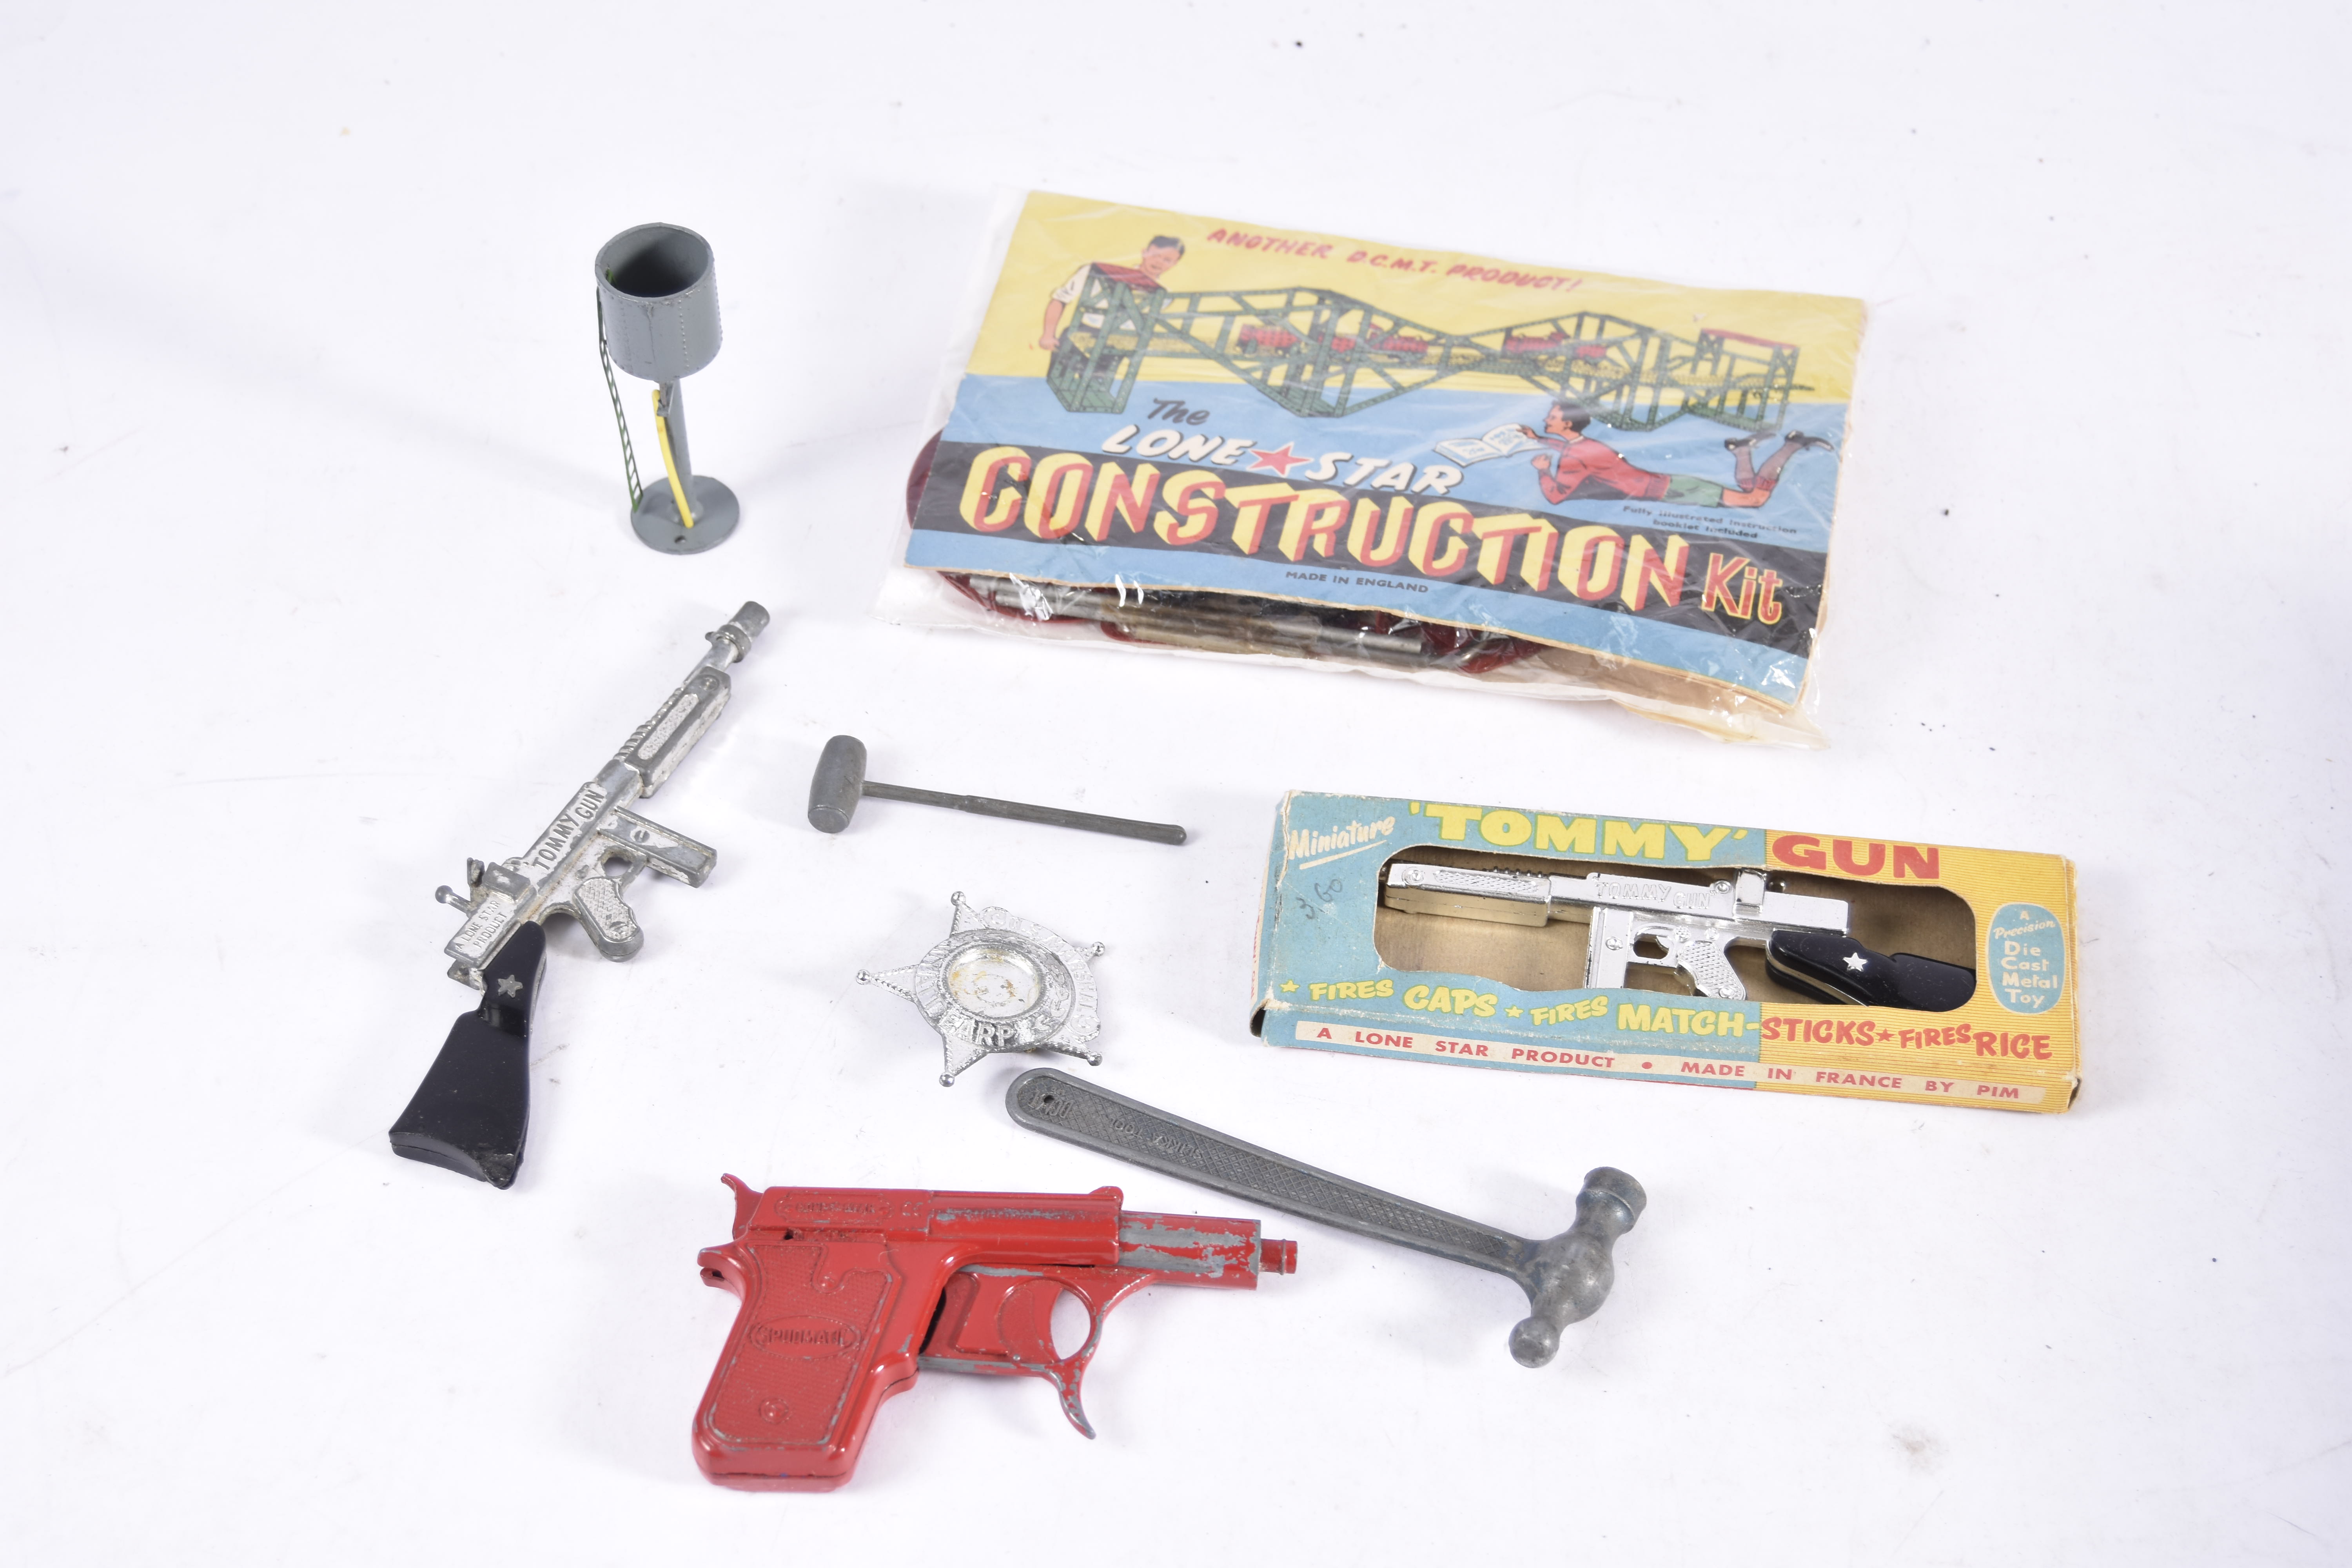 Lone Star Toys and Guns, uncommon DCMT 'Meccano' style construction kit Catalogue, together with